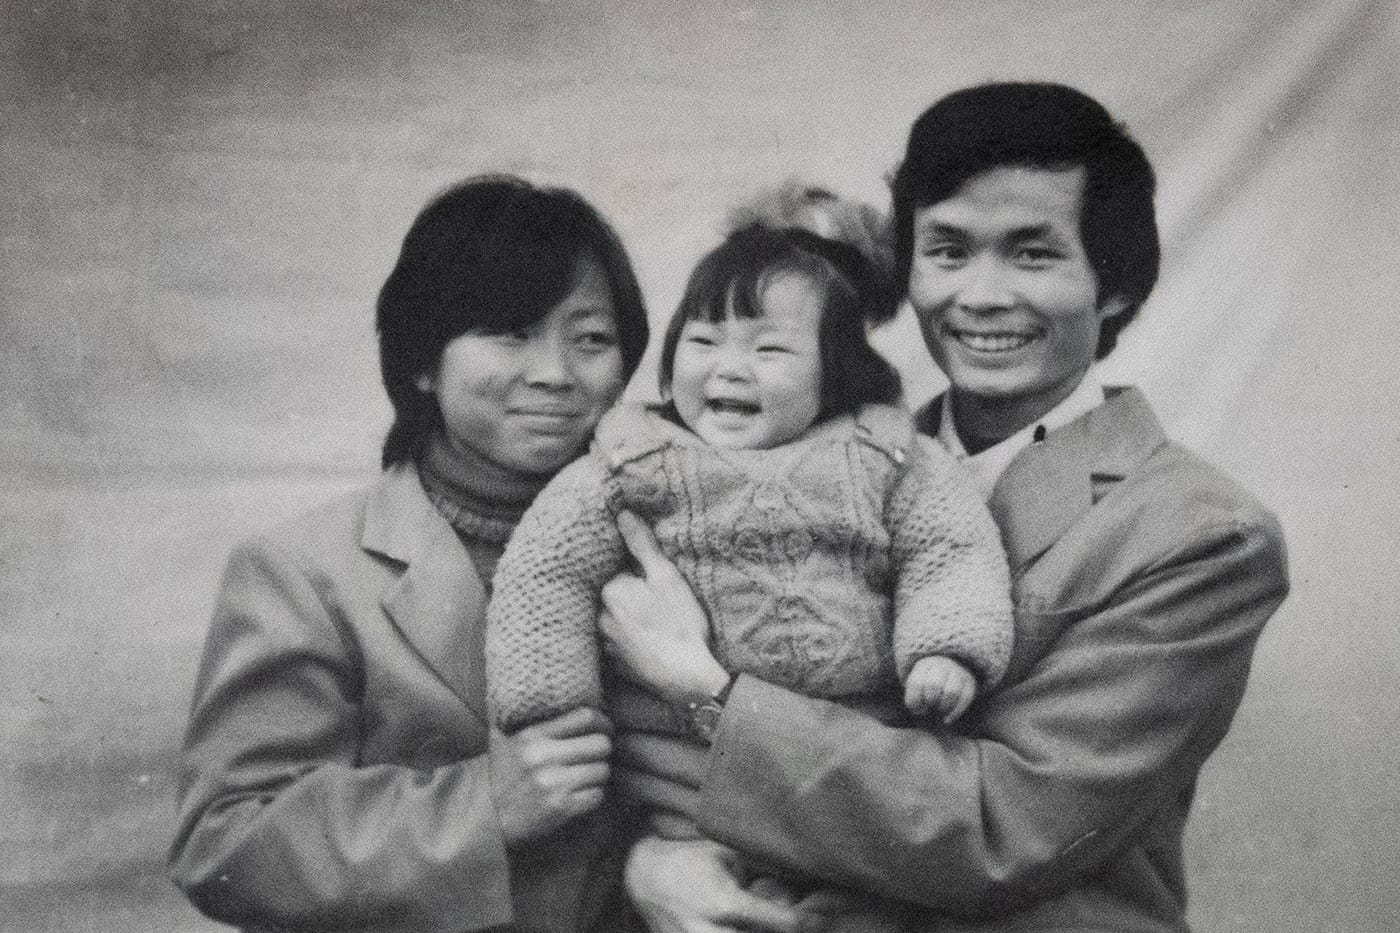 Nanfu Wang, at age 1, being held by her mother and father.